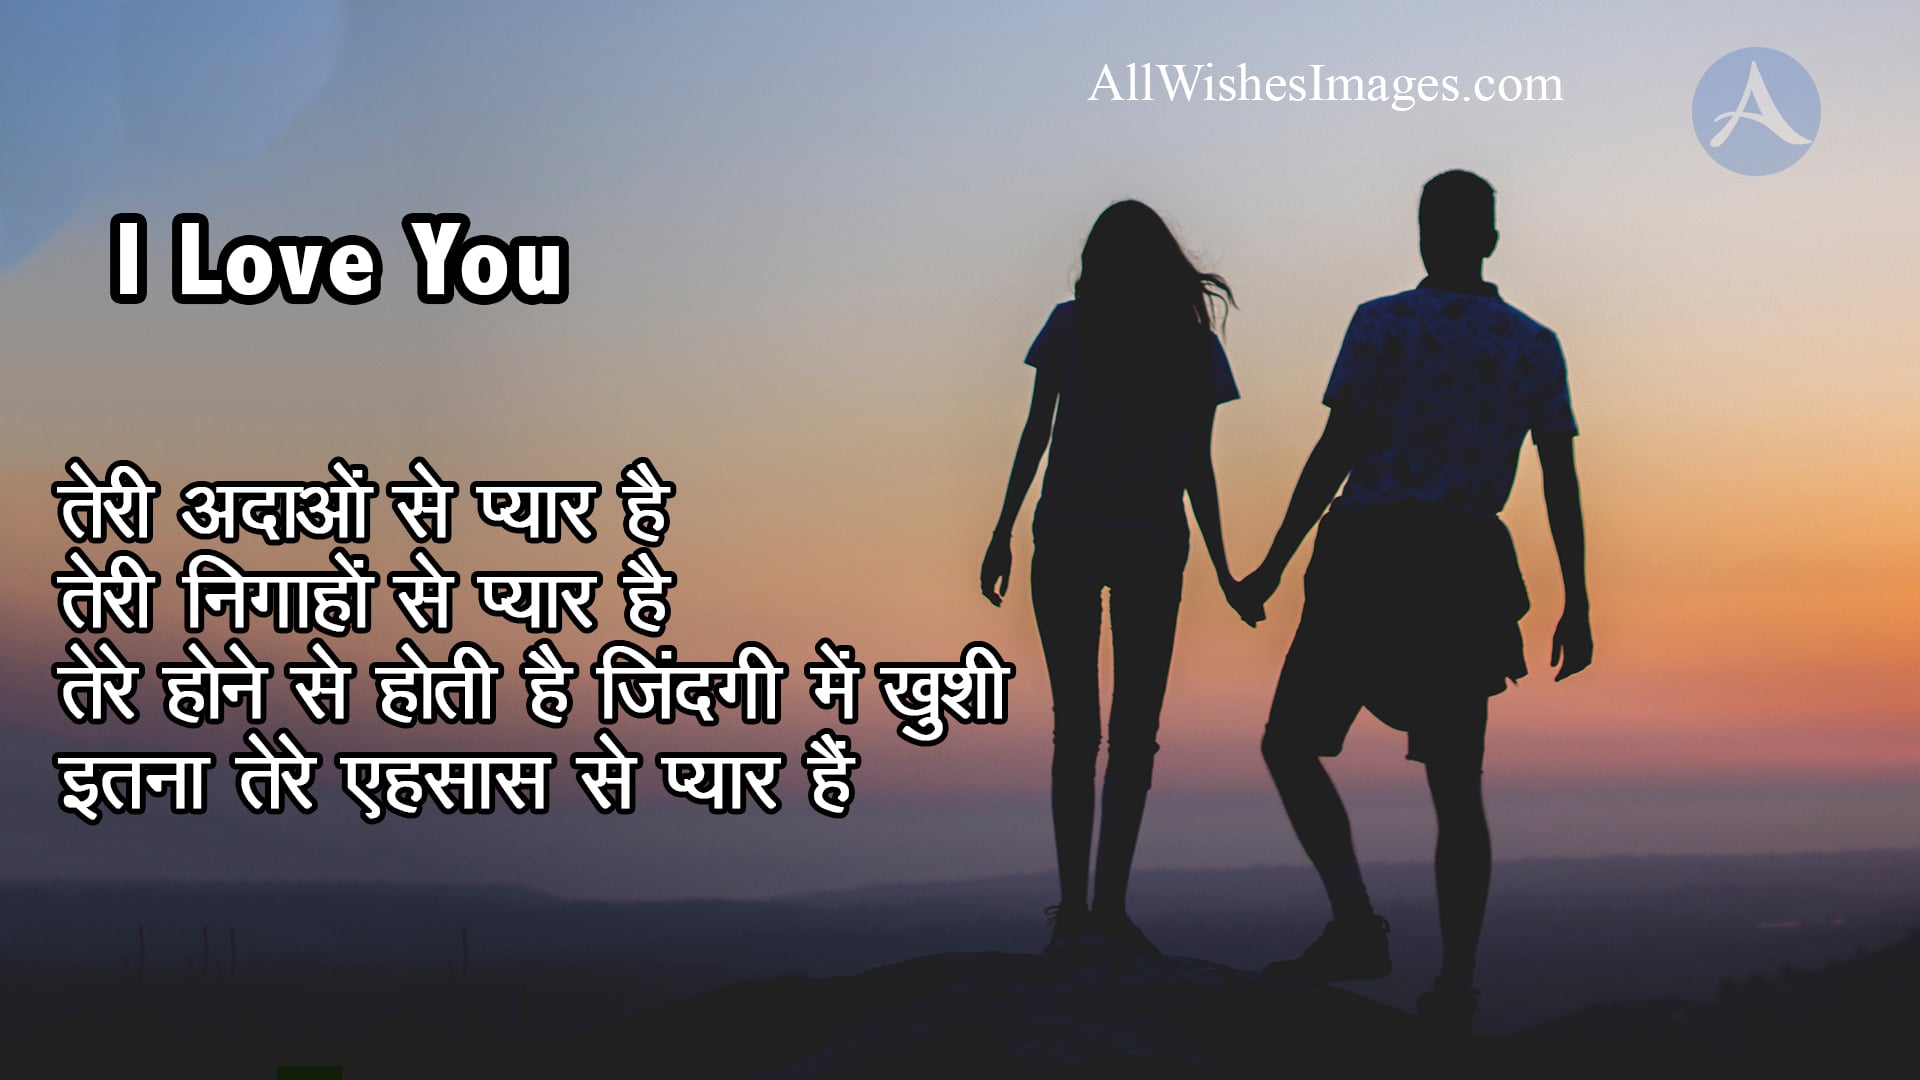 I Love You Shayari Image Hd - All Wishes Images - Images for WhatsApp